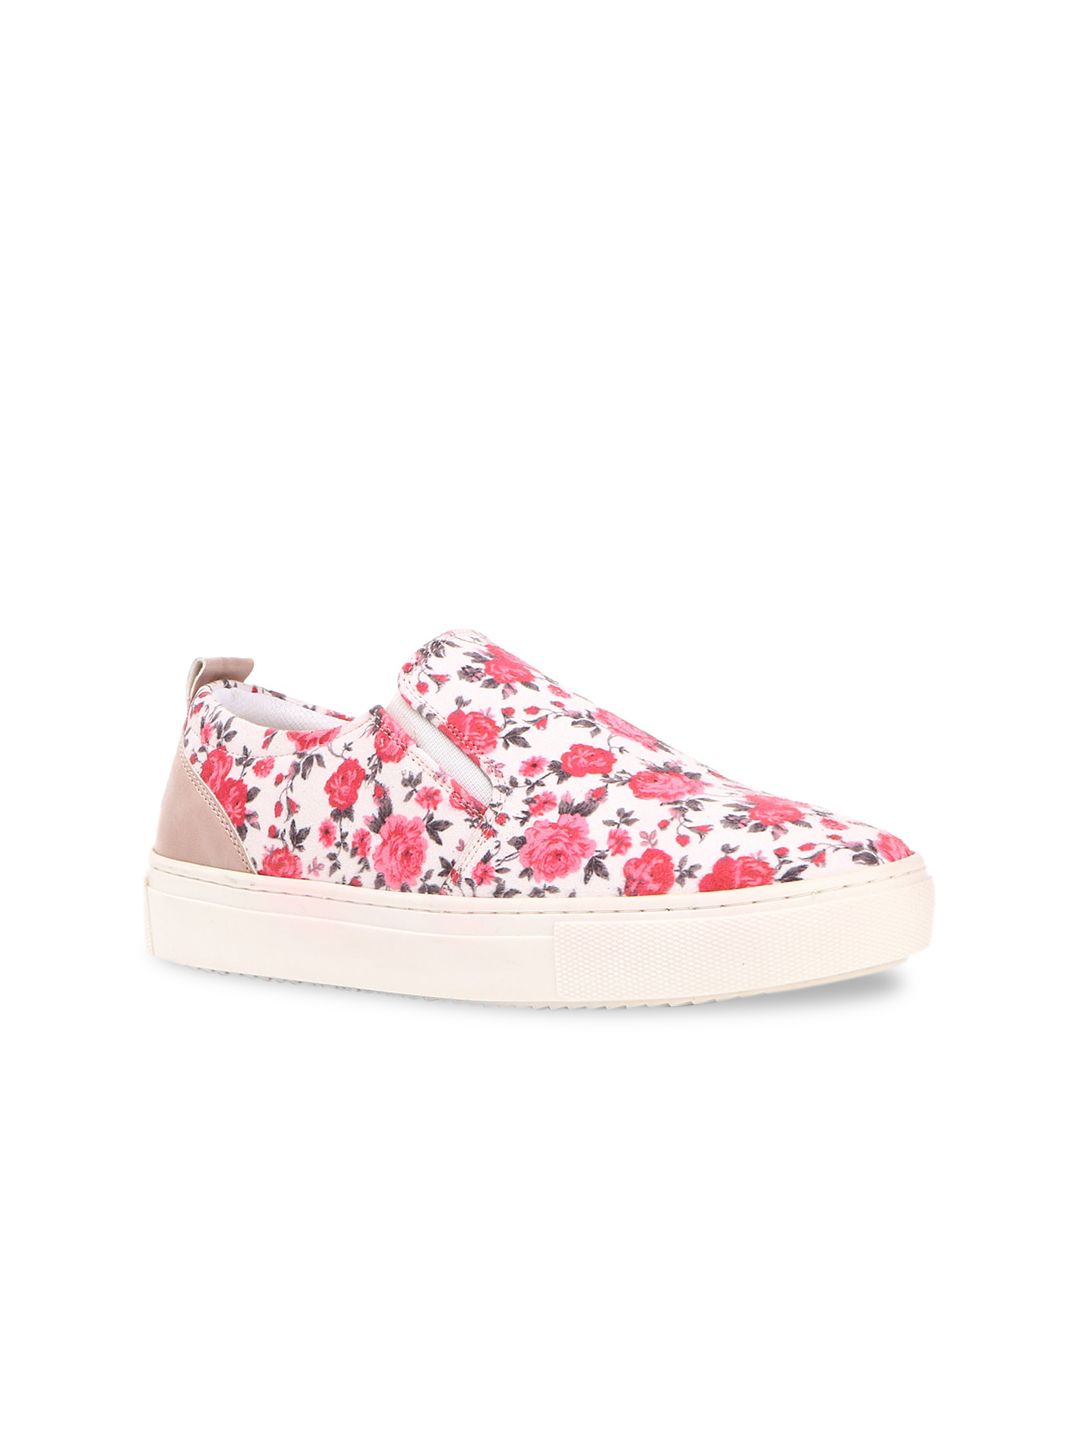 FOREVER 21 Women White Printed PU Slip-On Sneakers Price in India